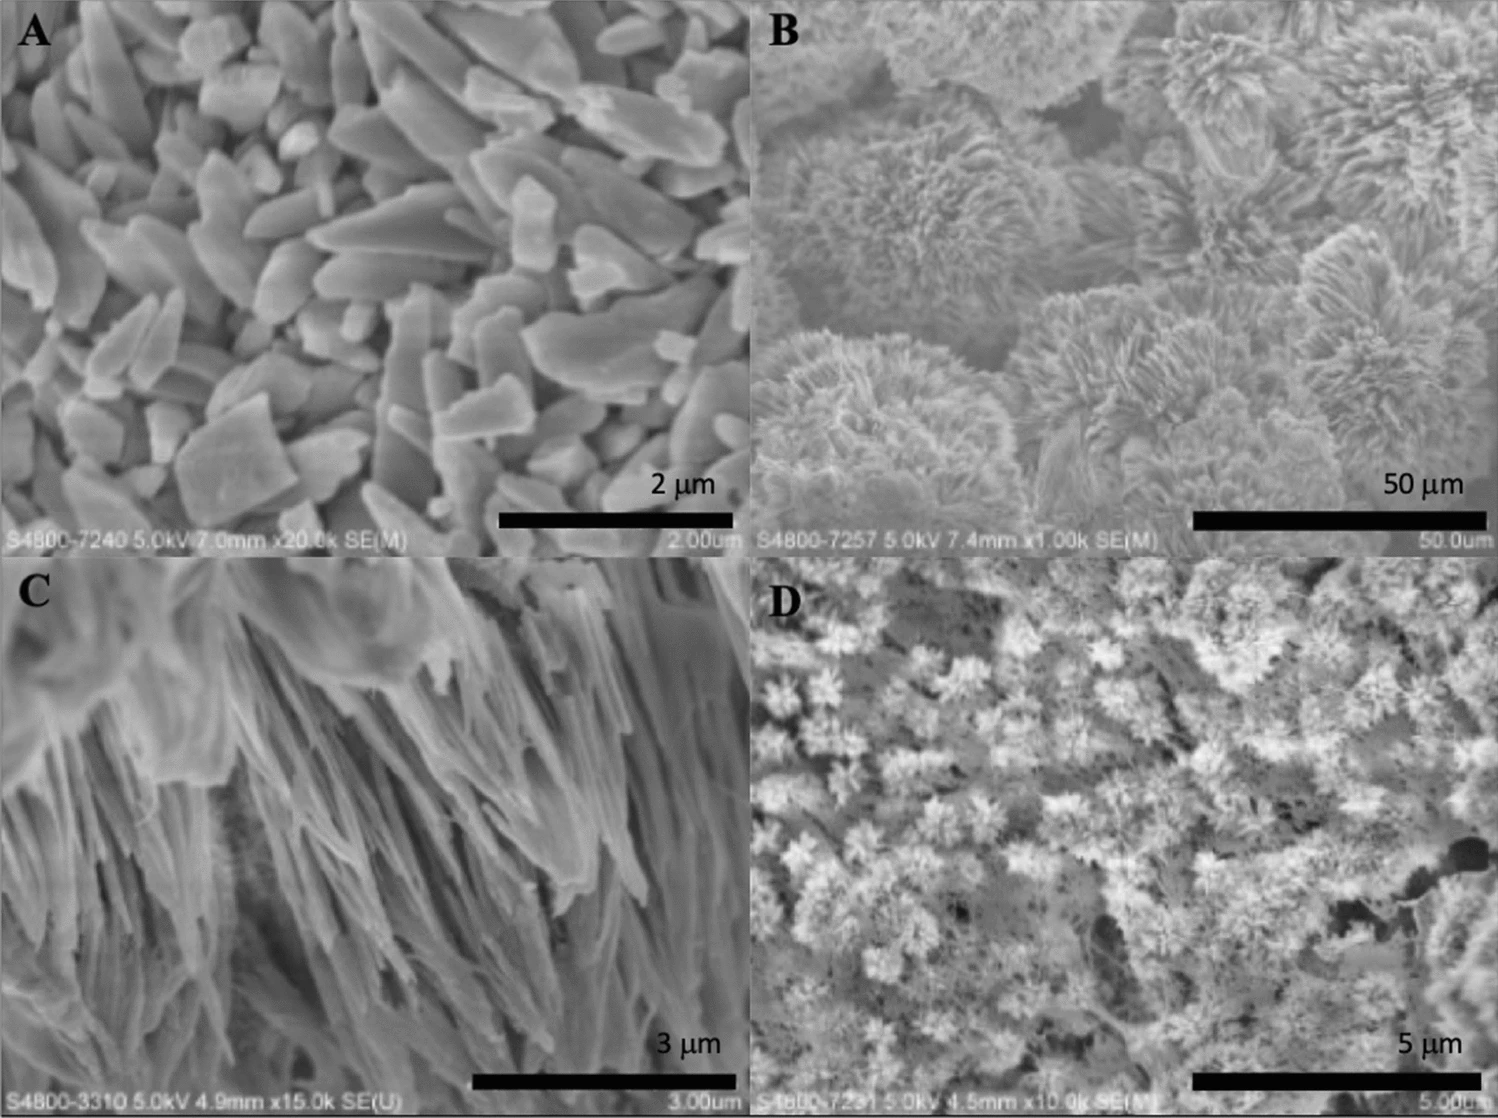 SEM micrographs of formed crystals treated with different strength of electric current. (A) 5 mA; (B) 8 mA; (C) 10 mA; (D) 12 mA.